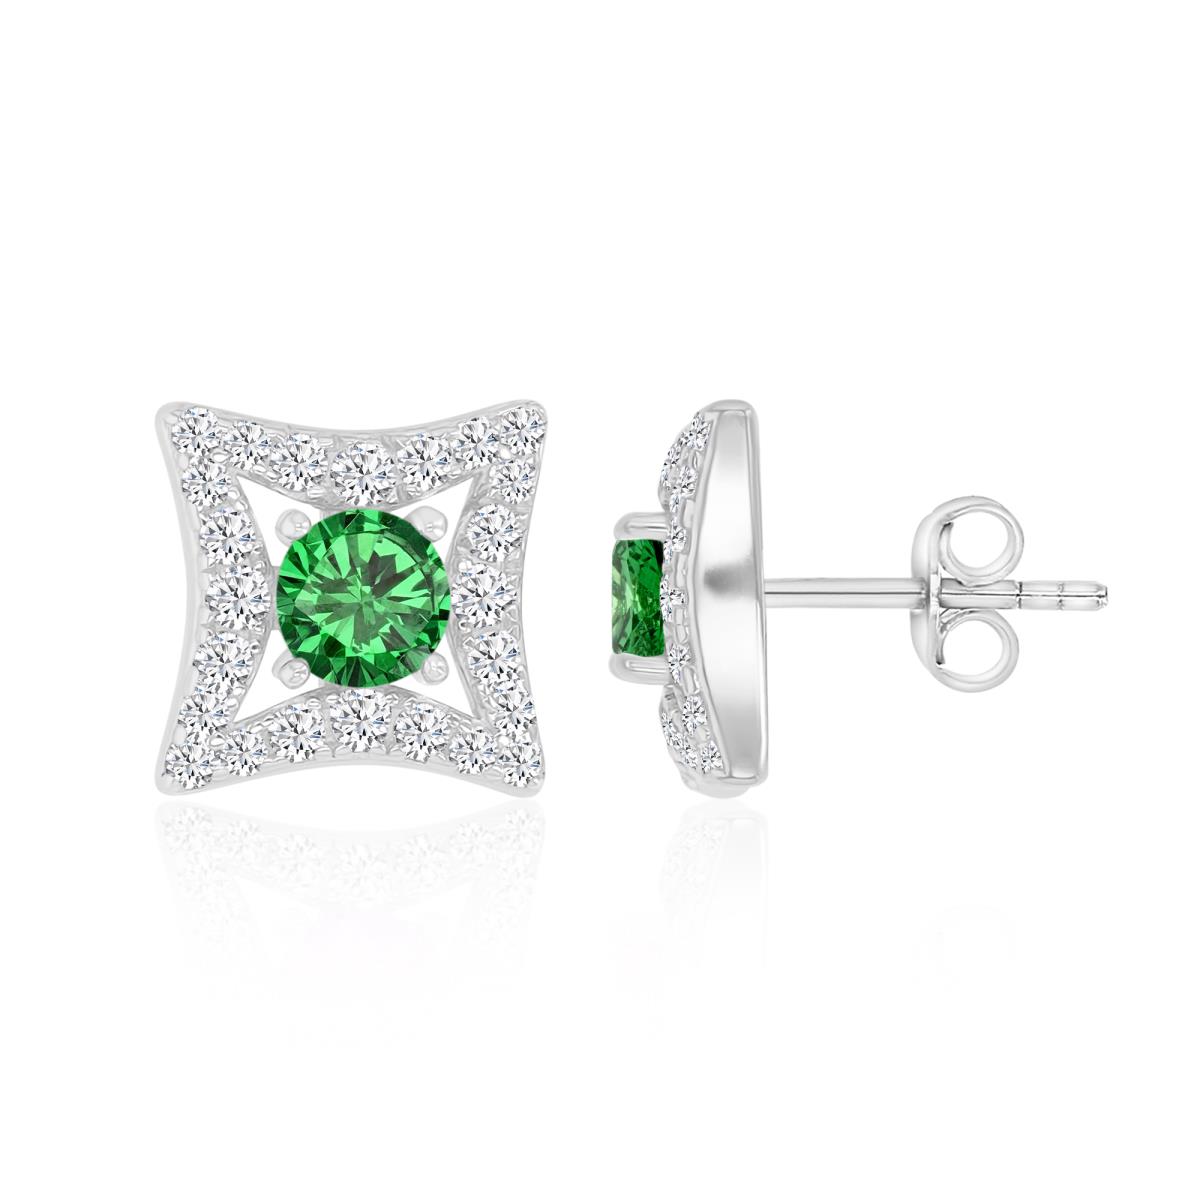 Sterling Silver Rhodium 11MM Polished Green & White CZ Square Stud Earrings